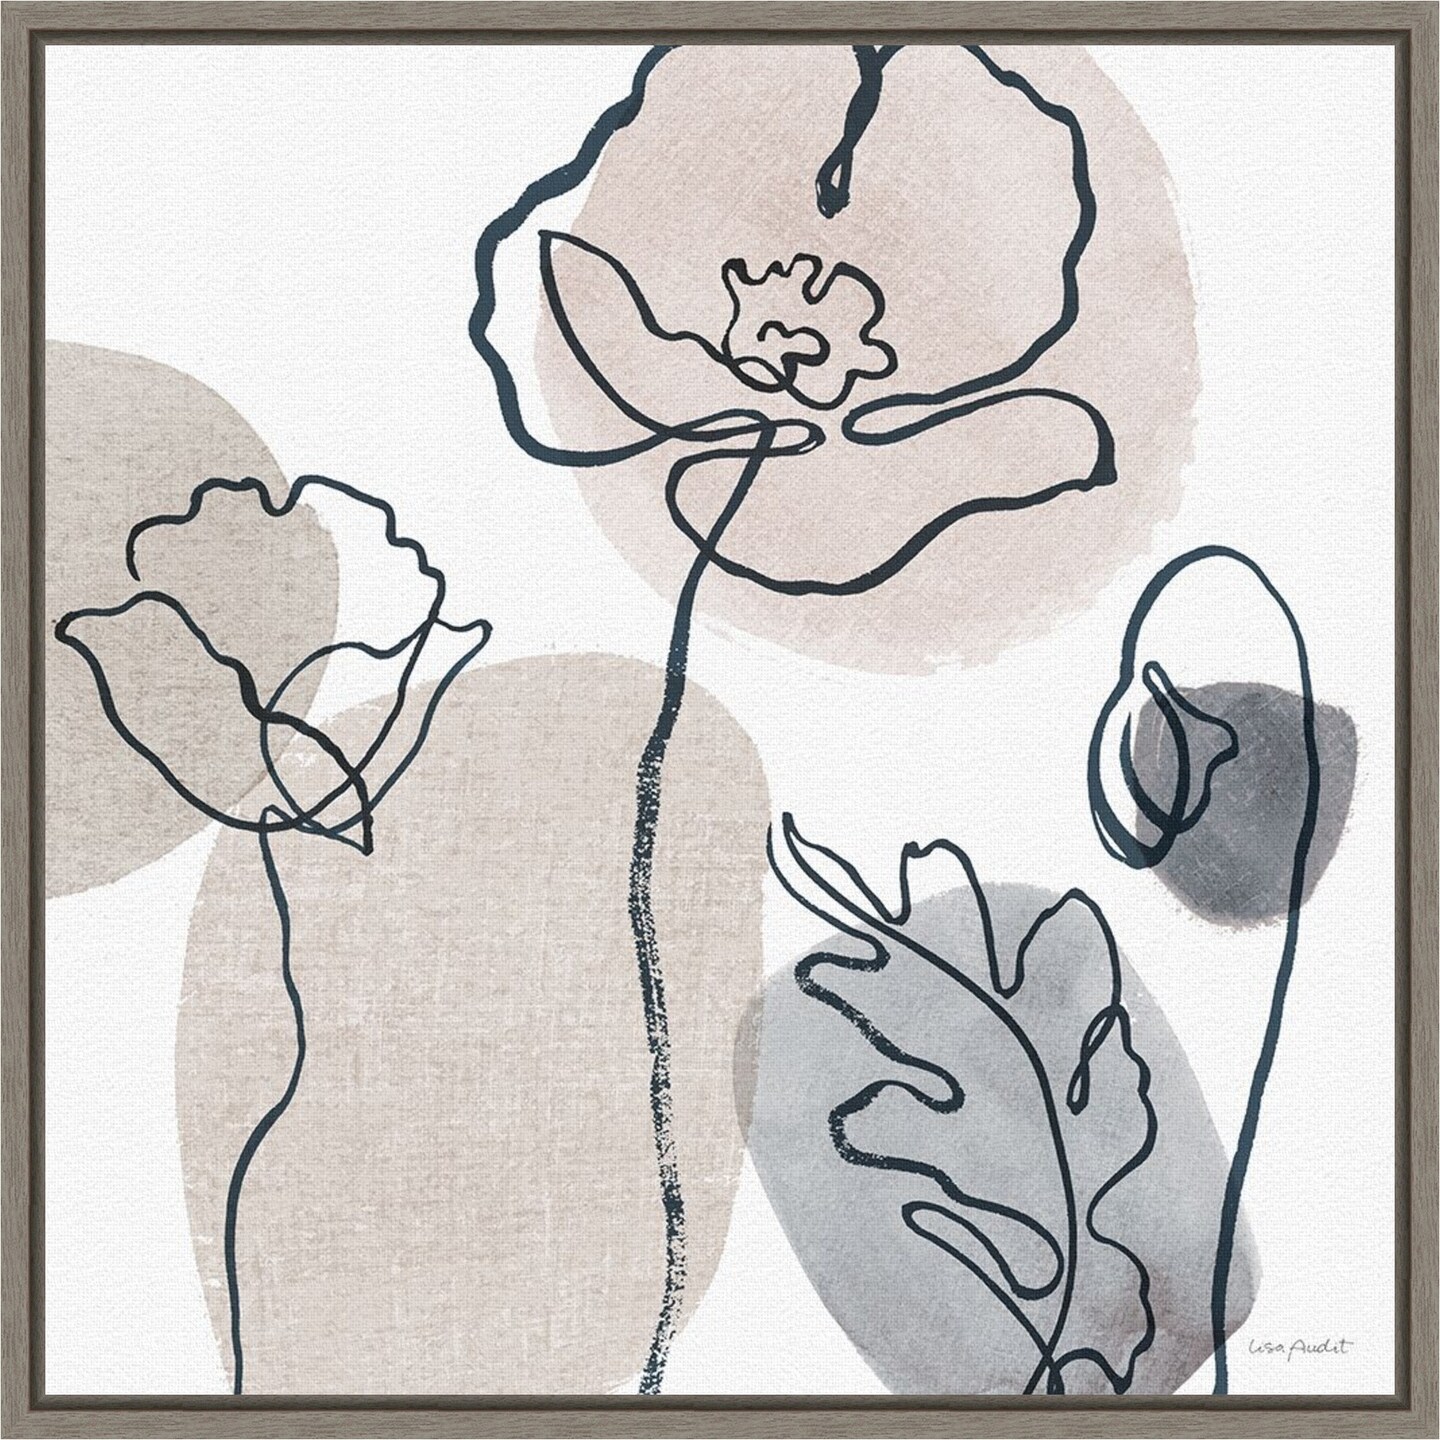 Think Neutral 02A (Floral) by Lisa Audit 16-in. W x 16-in. H. Canvas Wall Art Print Framed in Grey